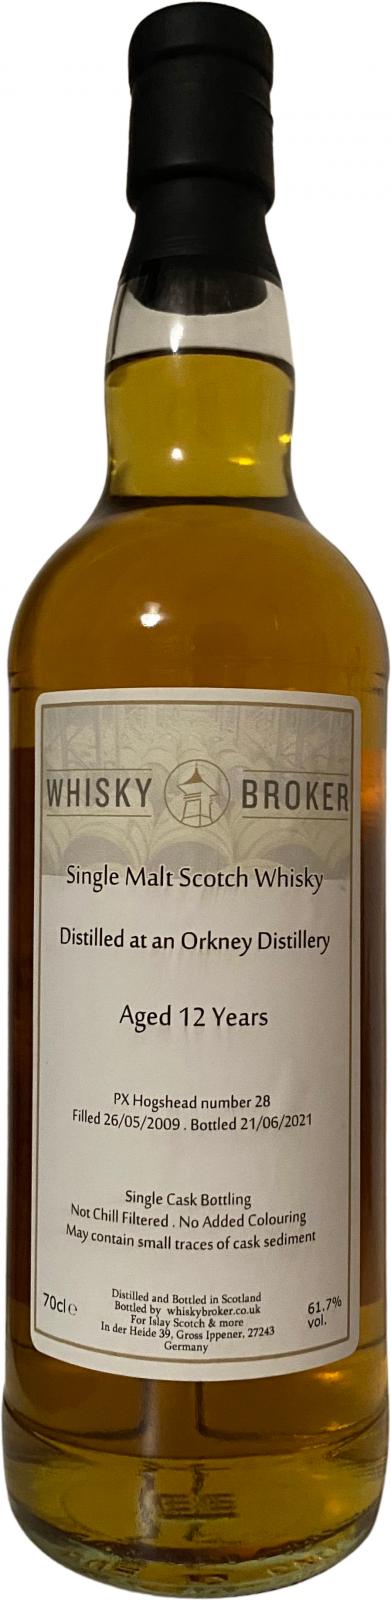 An Orkney Distillery 2009 WhB